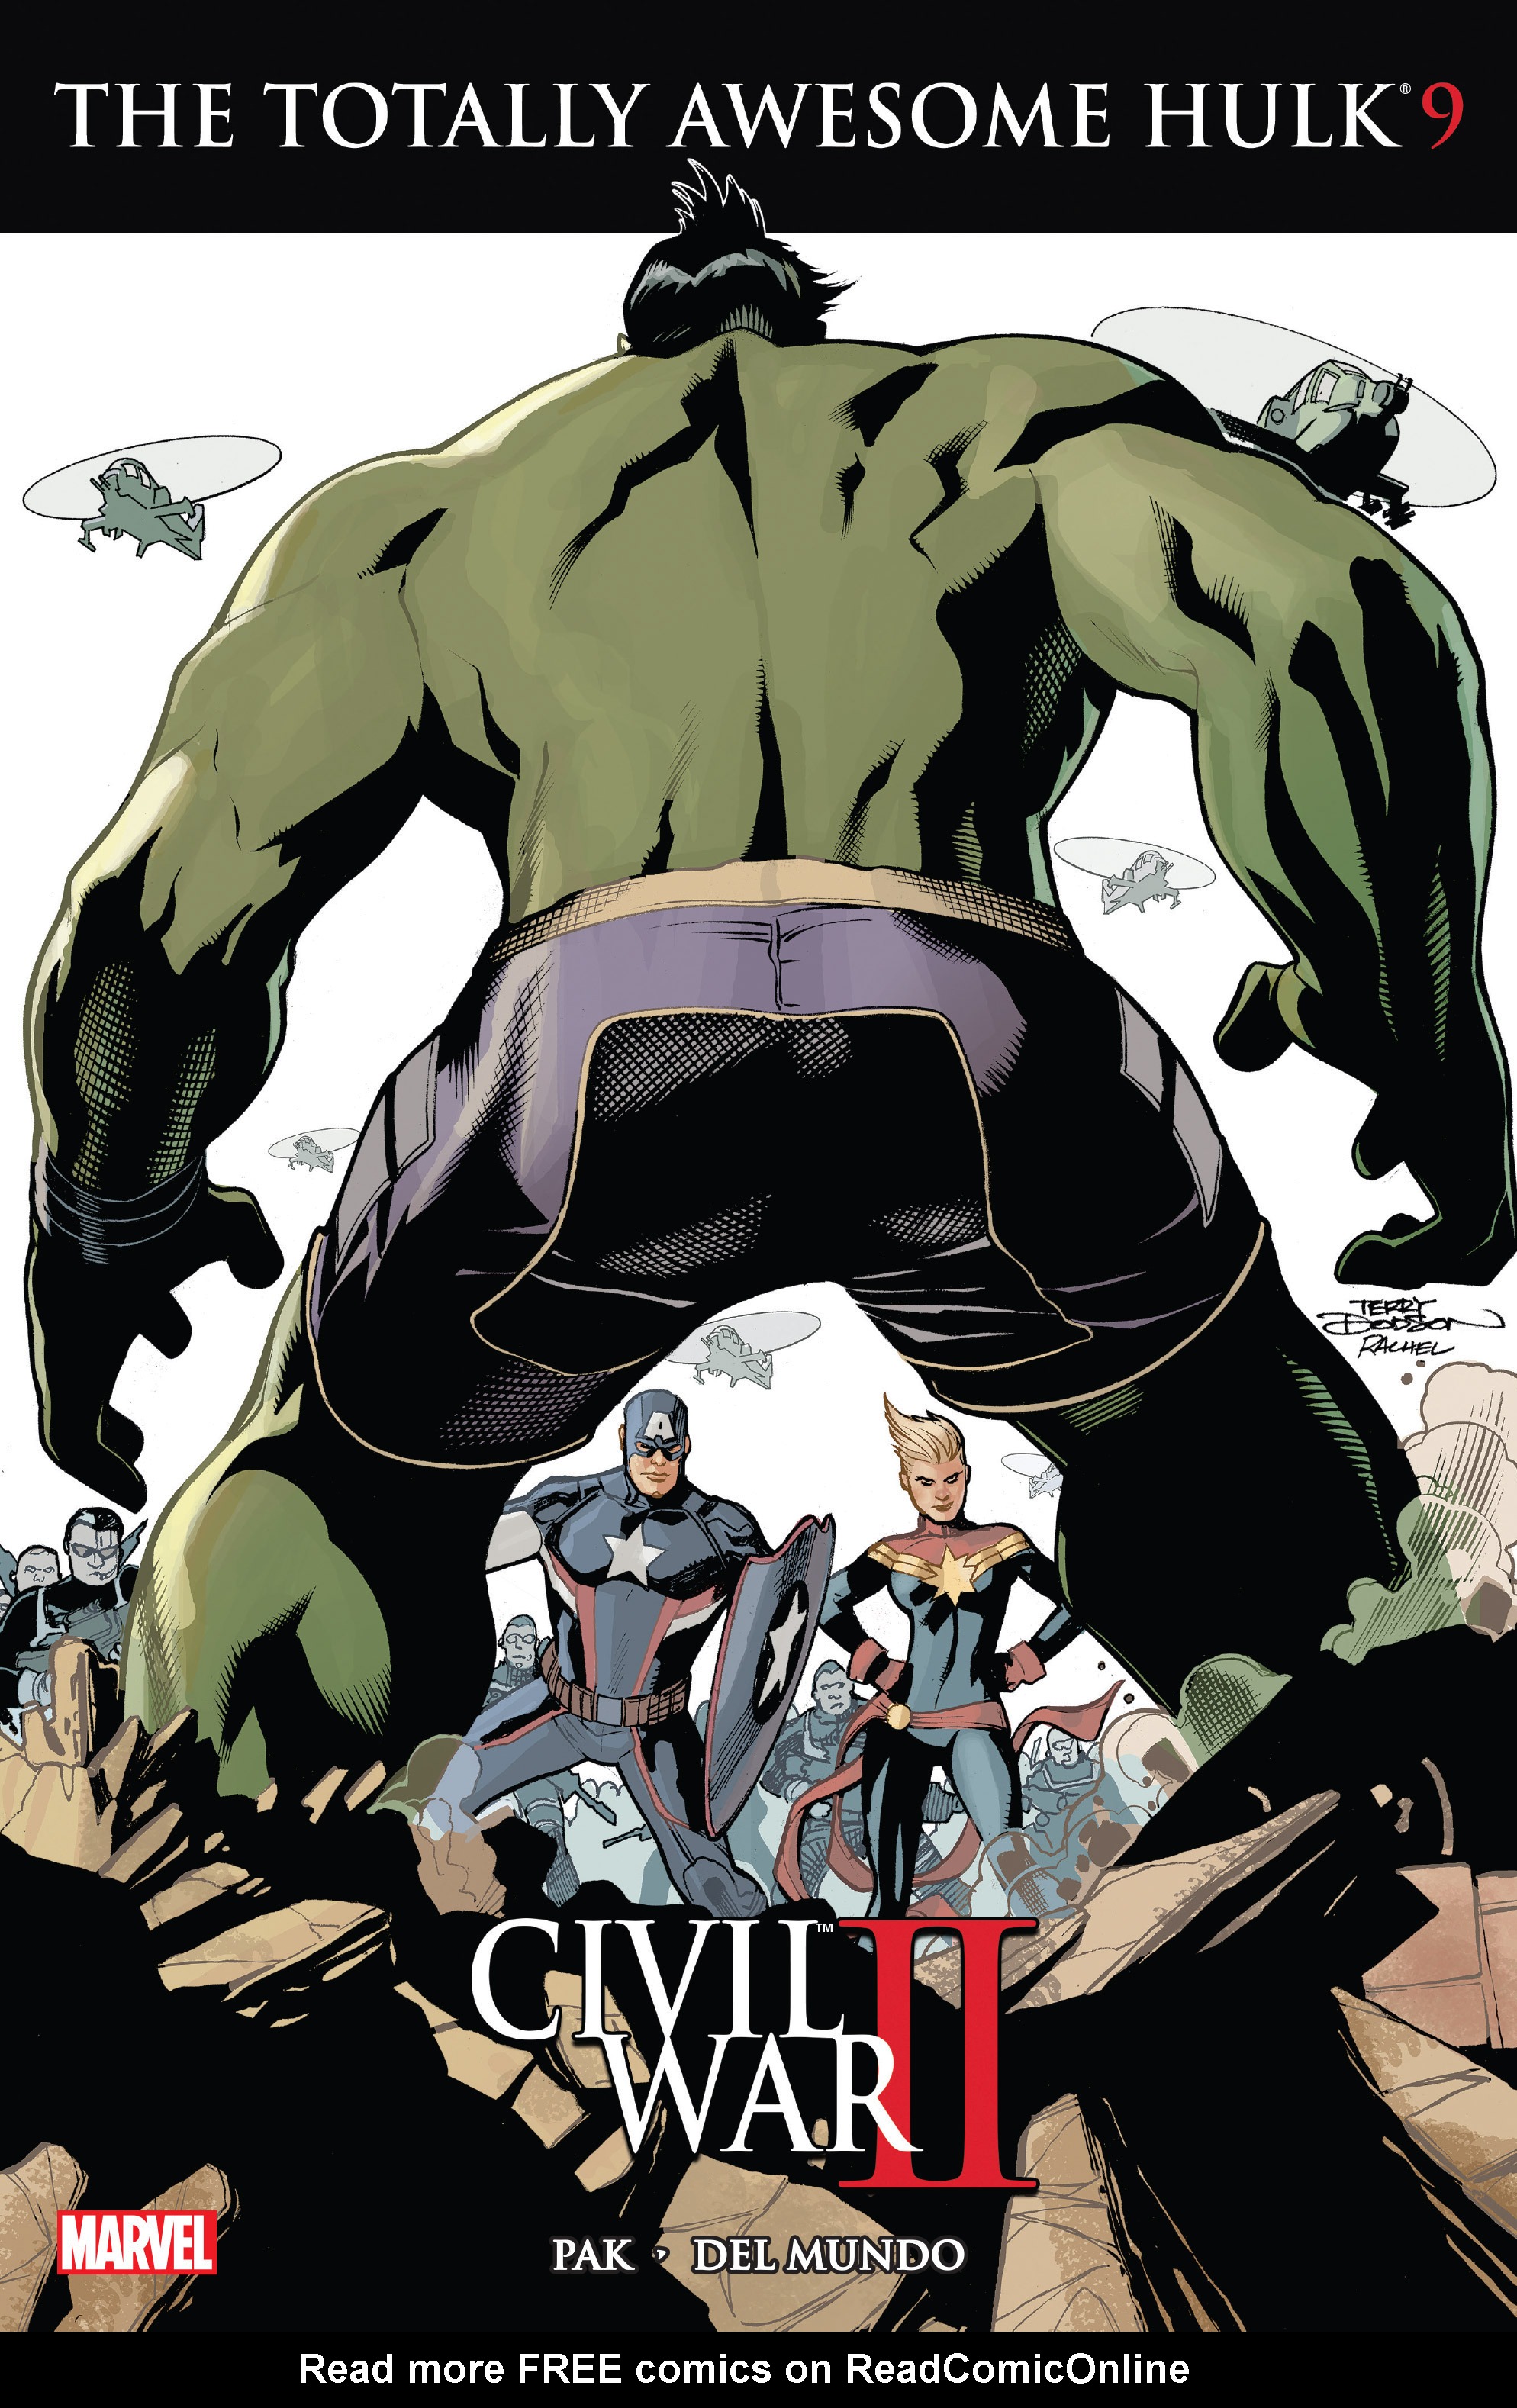 Read online Totally Awesome Hulk comic -  Issue #9 - 1